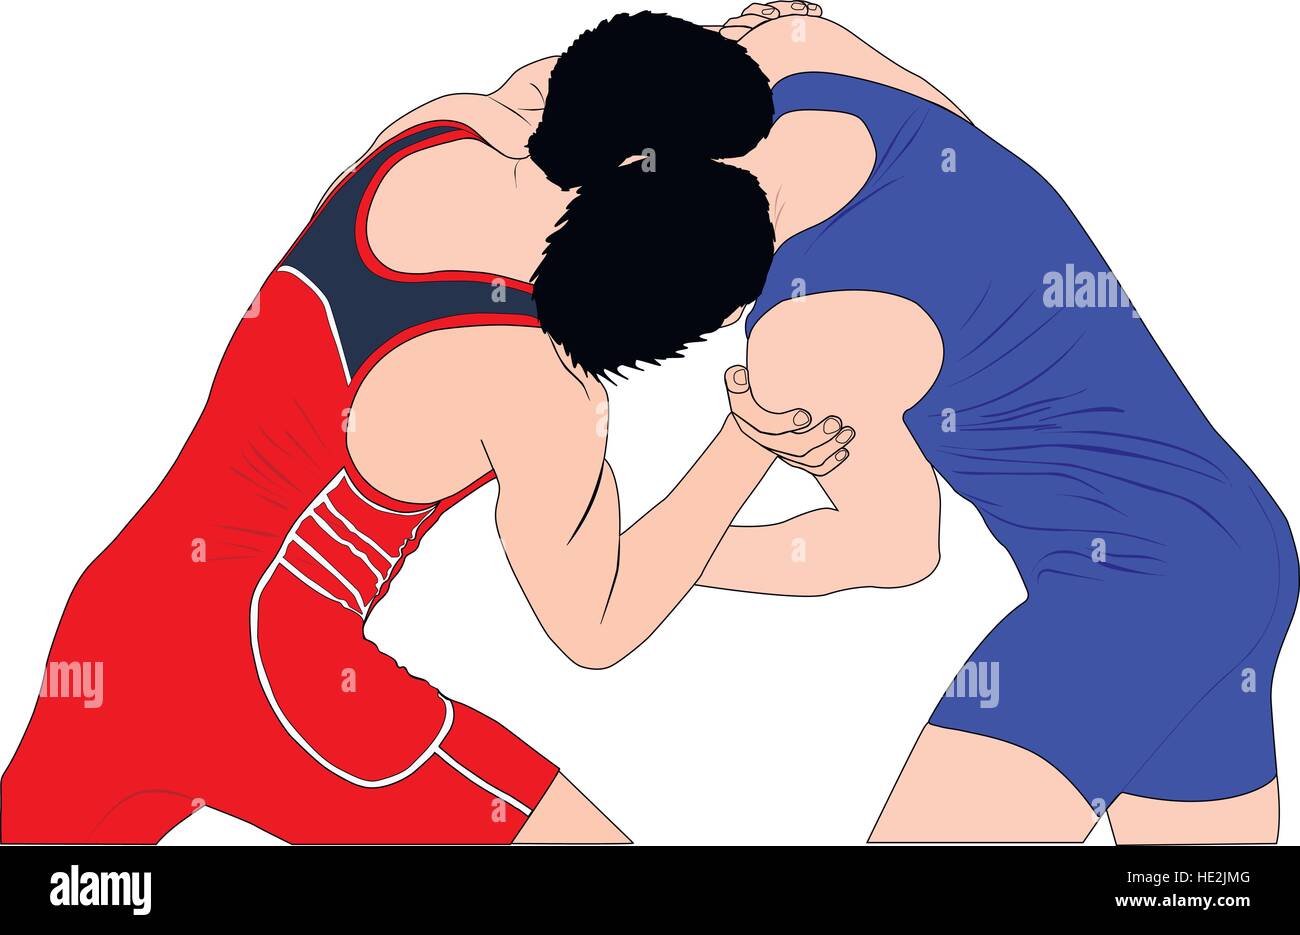 two men wrestlers in Greco-Roman wrestling at competitions. color silhouette vector illustration Stock Vector